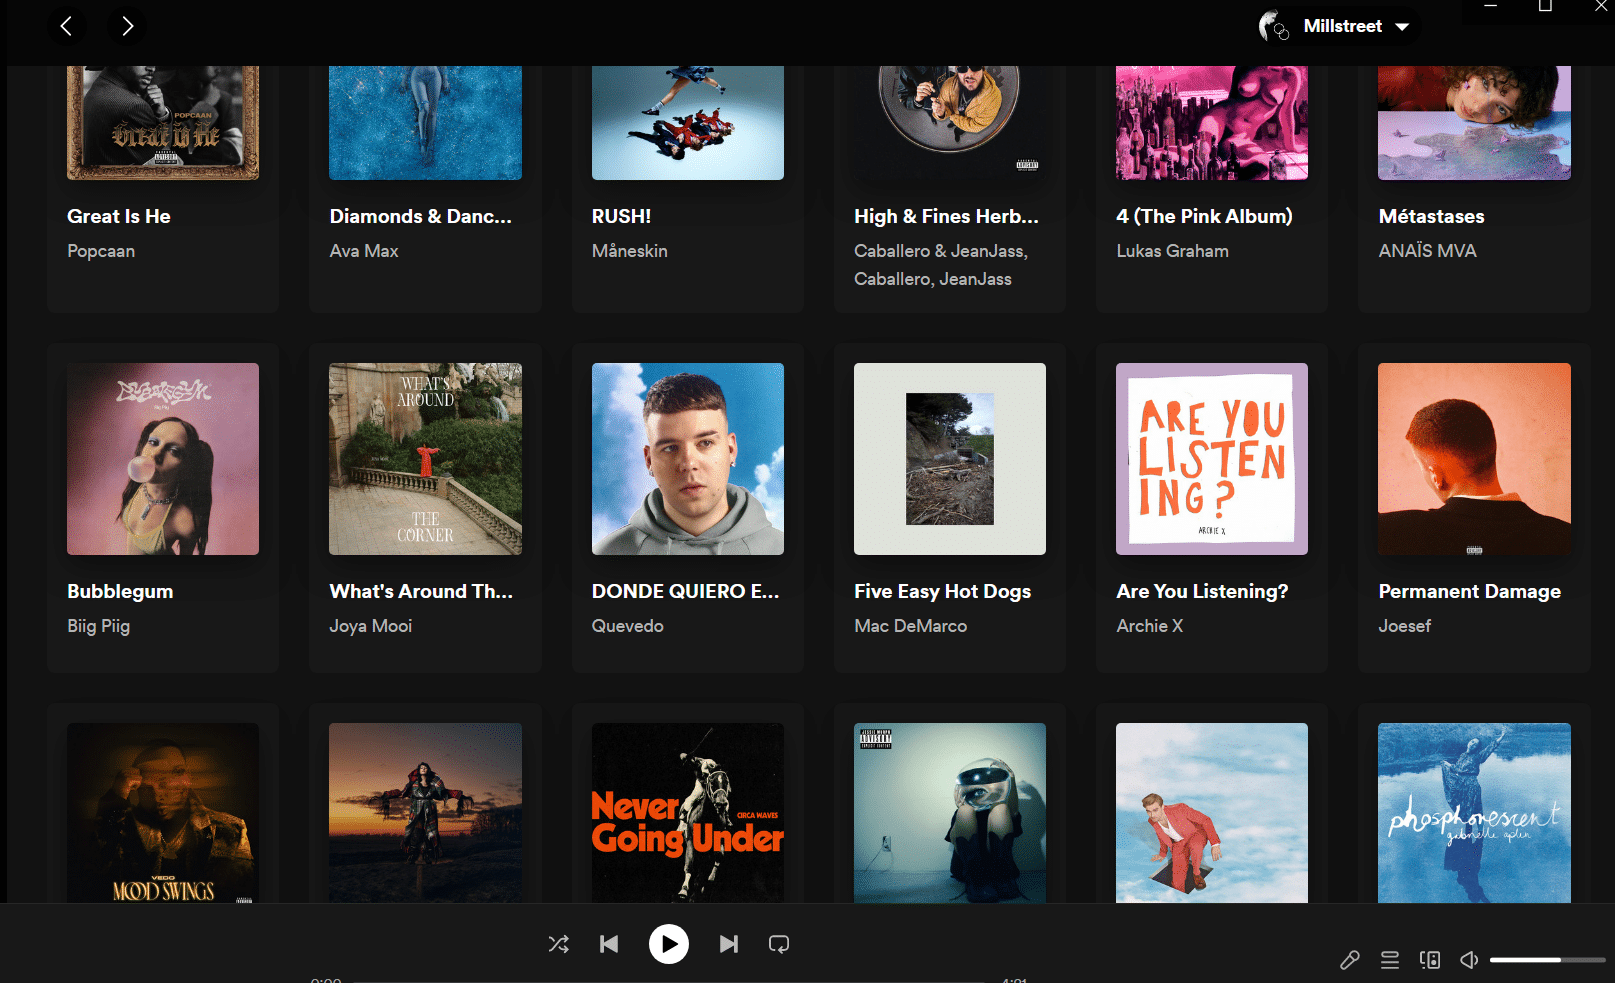 examples of artwork on Spotify